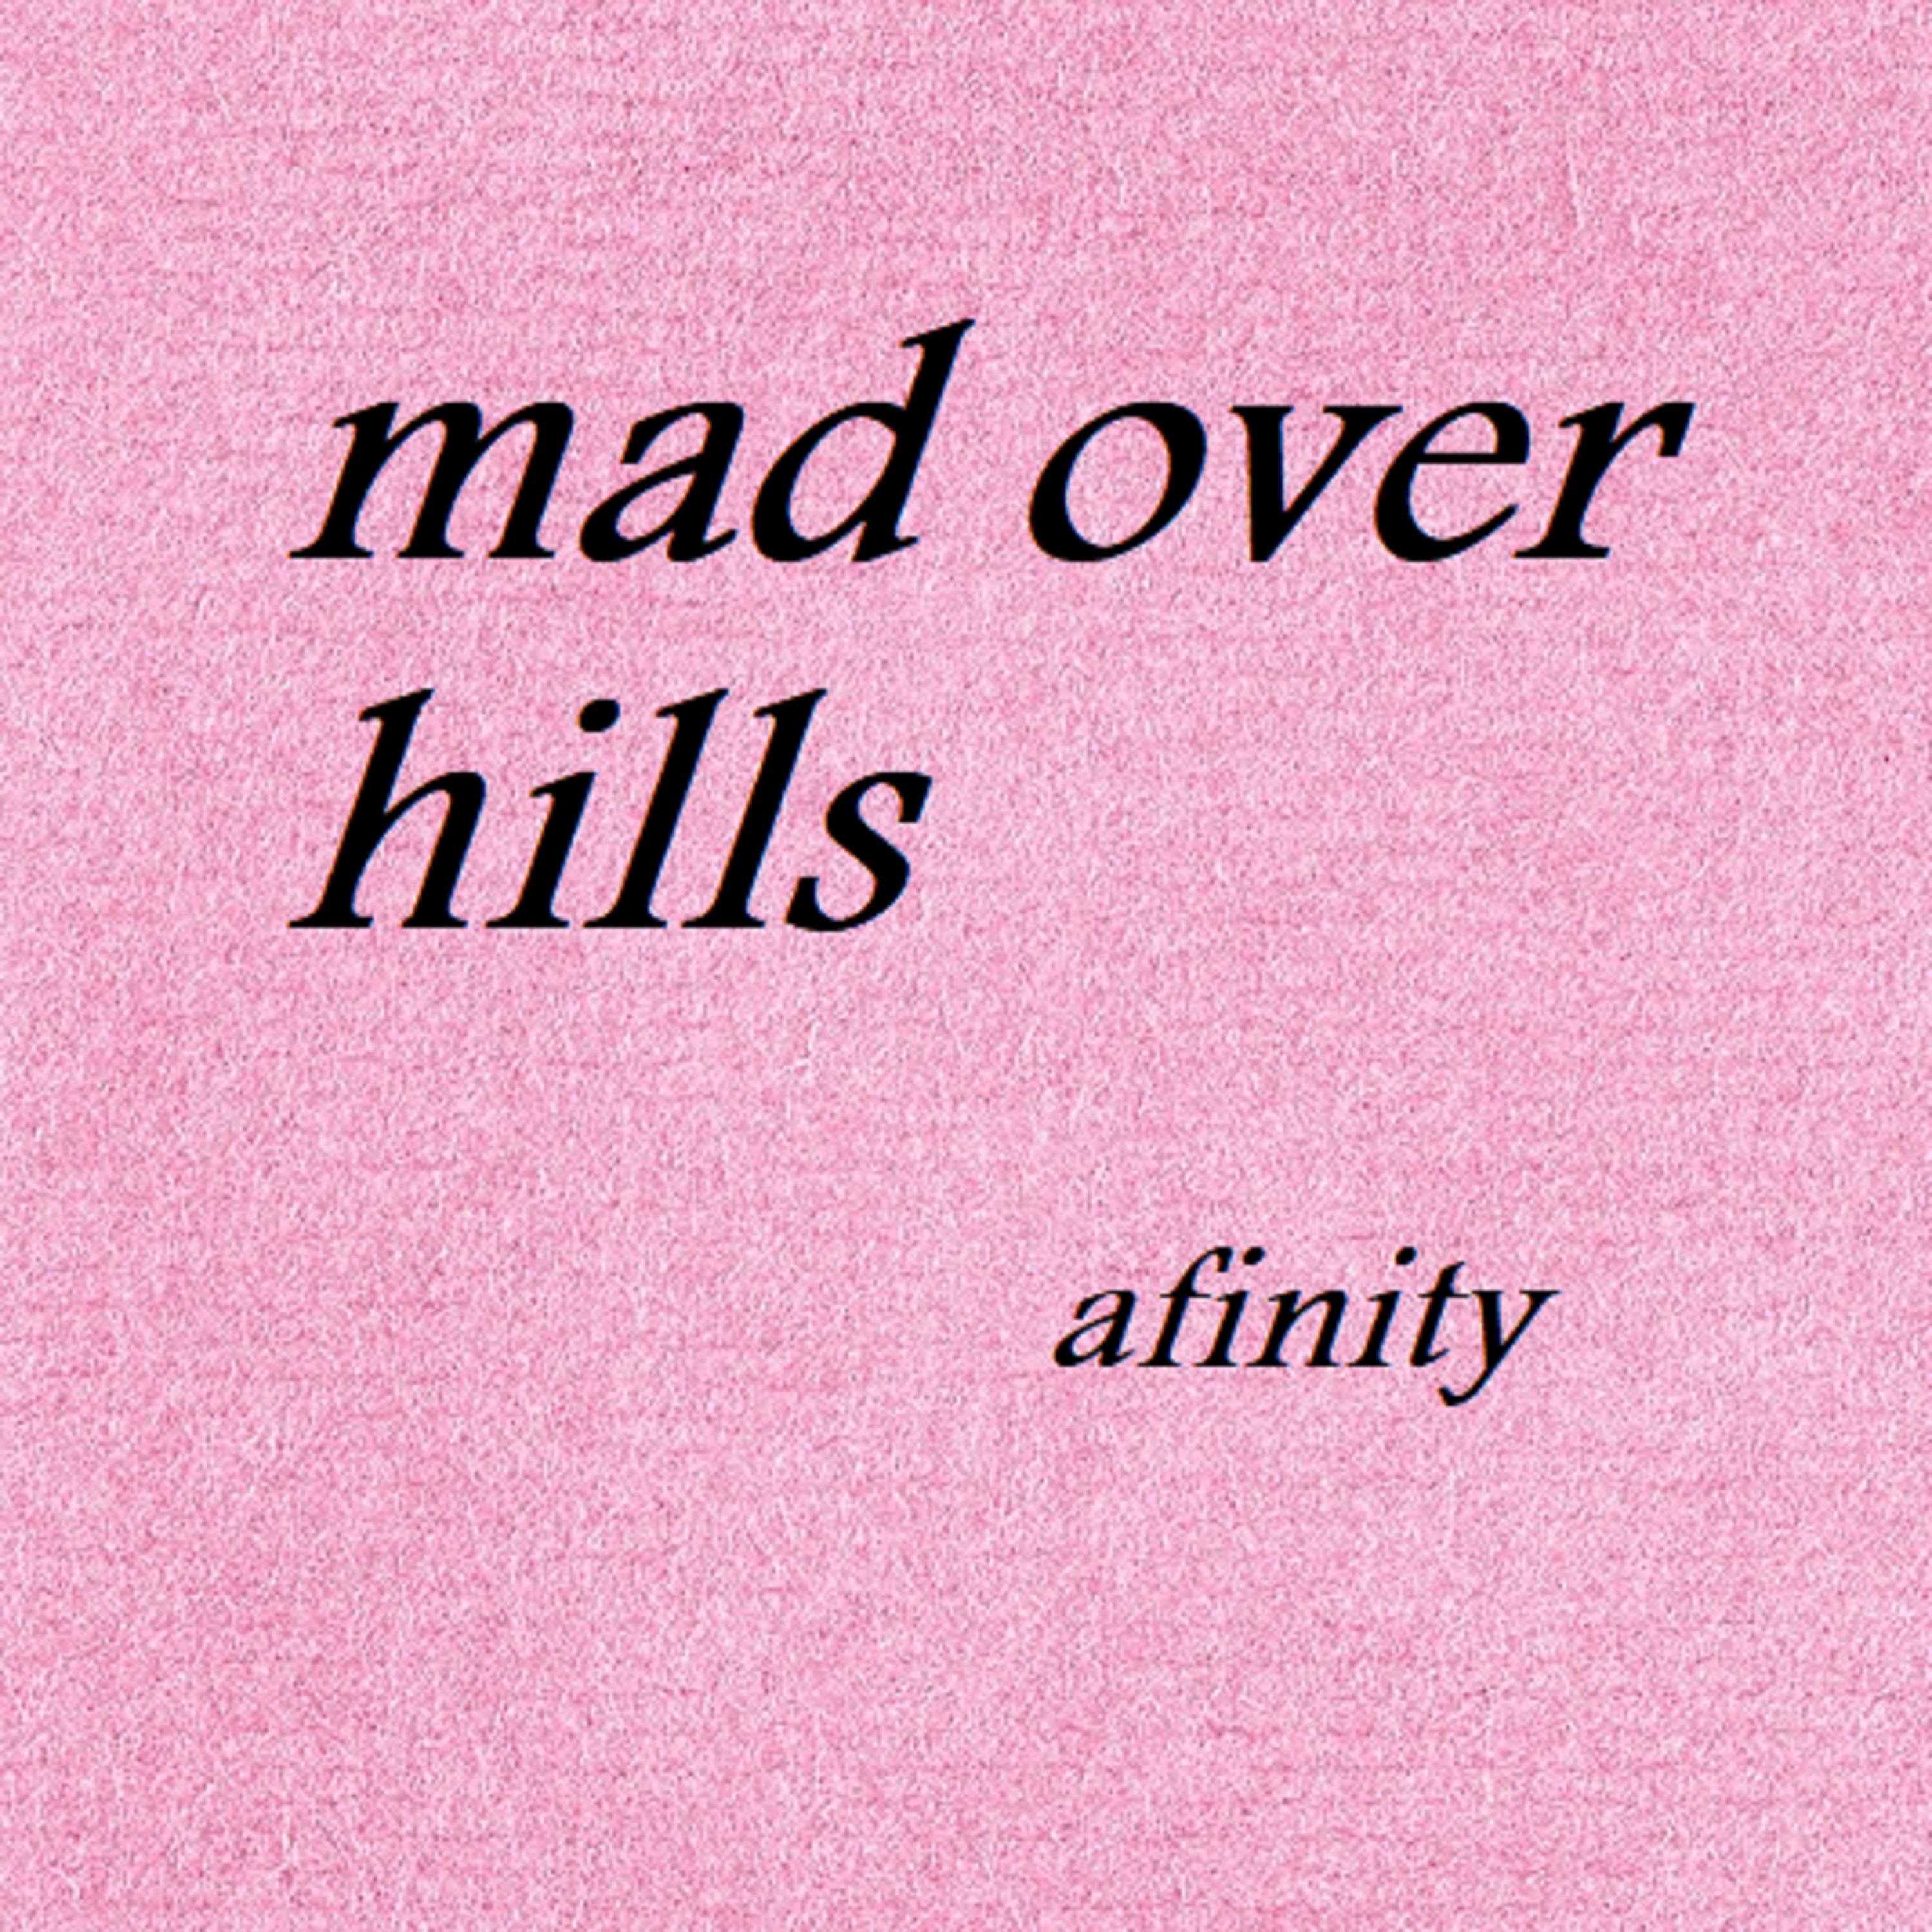 Afinity - Mad over Hills (Cover)